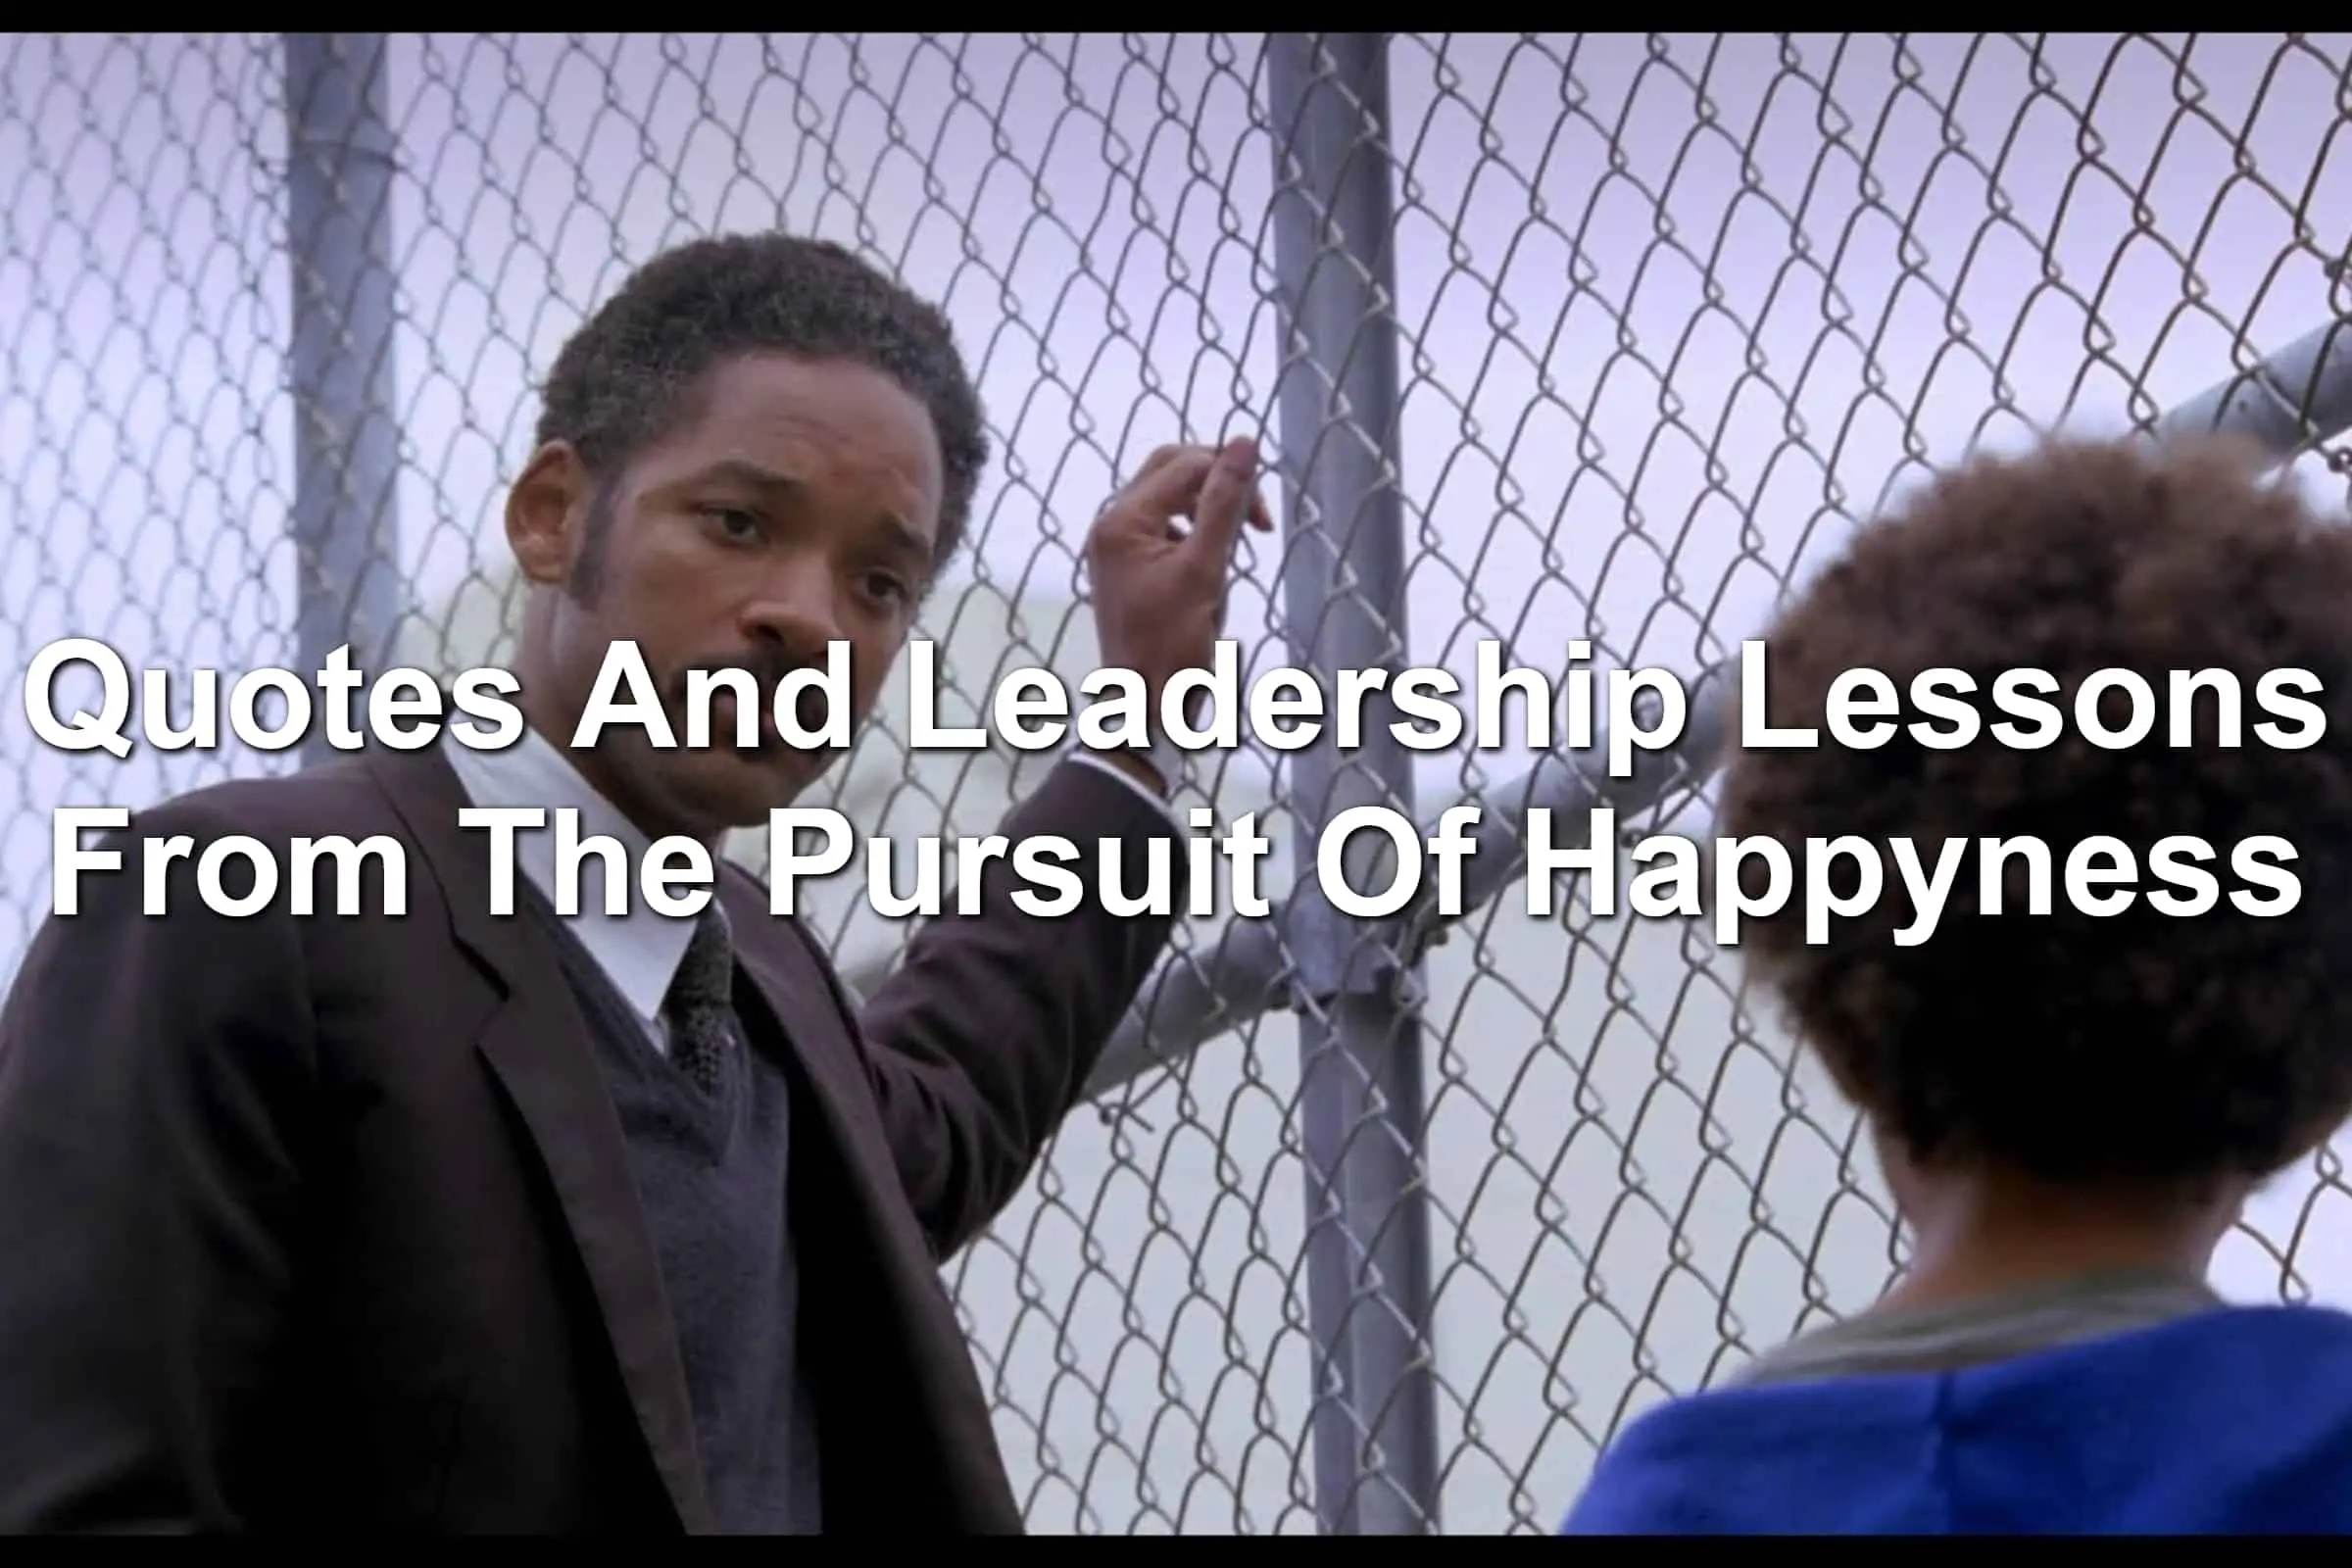 Will Smith and Jaden Smith in The Pursuit Of Happyness